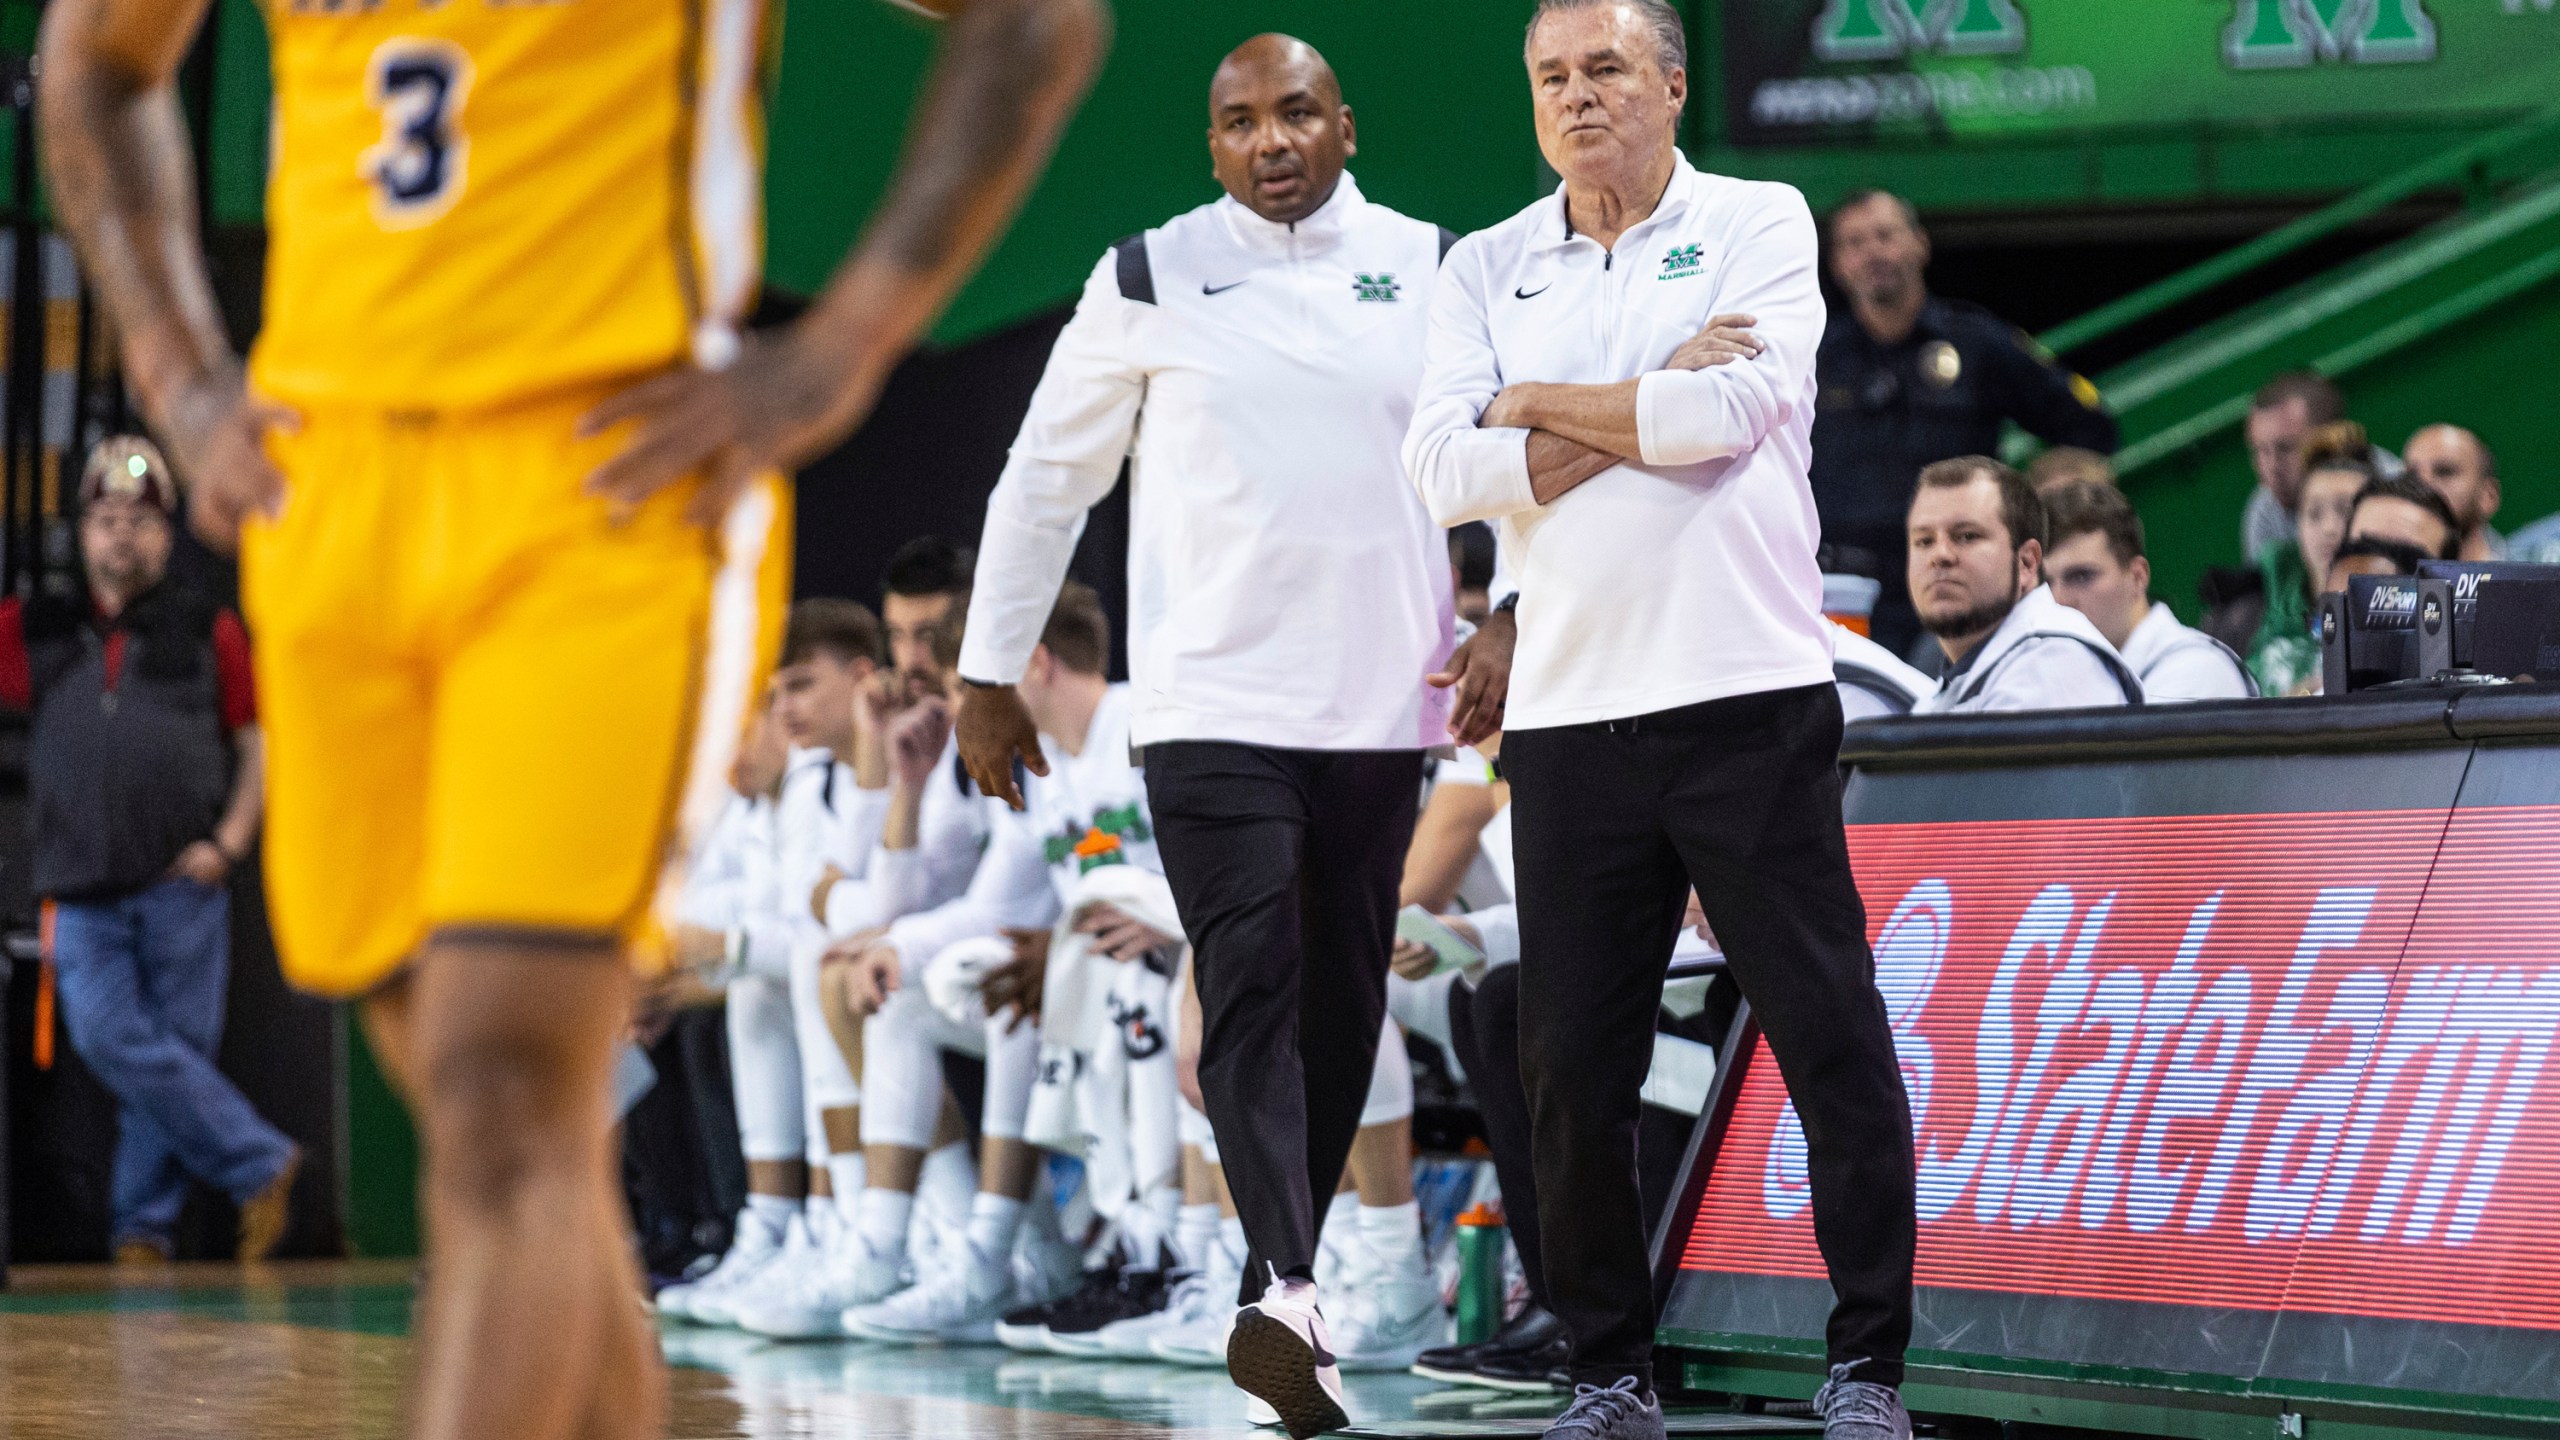 FILE - Marshall coach Dan D'Antoni, right, and assistant coach Cornelius Jackson talk on the sideline during the team's NCAA college basketball game against Coppin State, Nov. 19, 2022, in Huntington, W.Va. Jackson was named Monday, March 25, 2024, to replace D’Antoni as Marshall's head coach. (Sholten Singer/The Herald-Dispatch via AP, File)